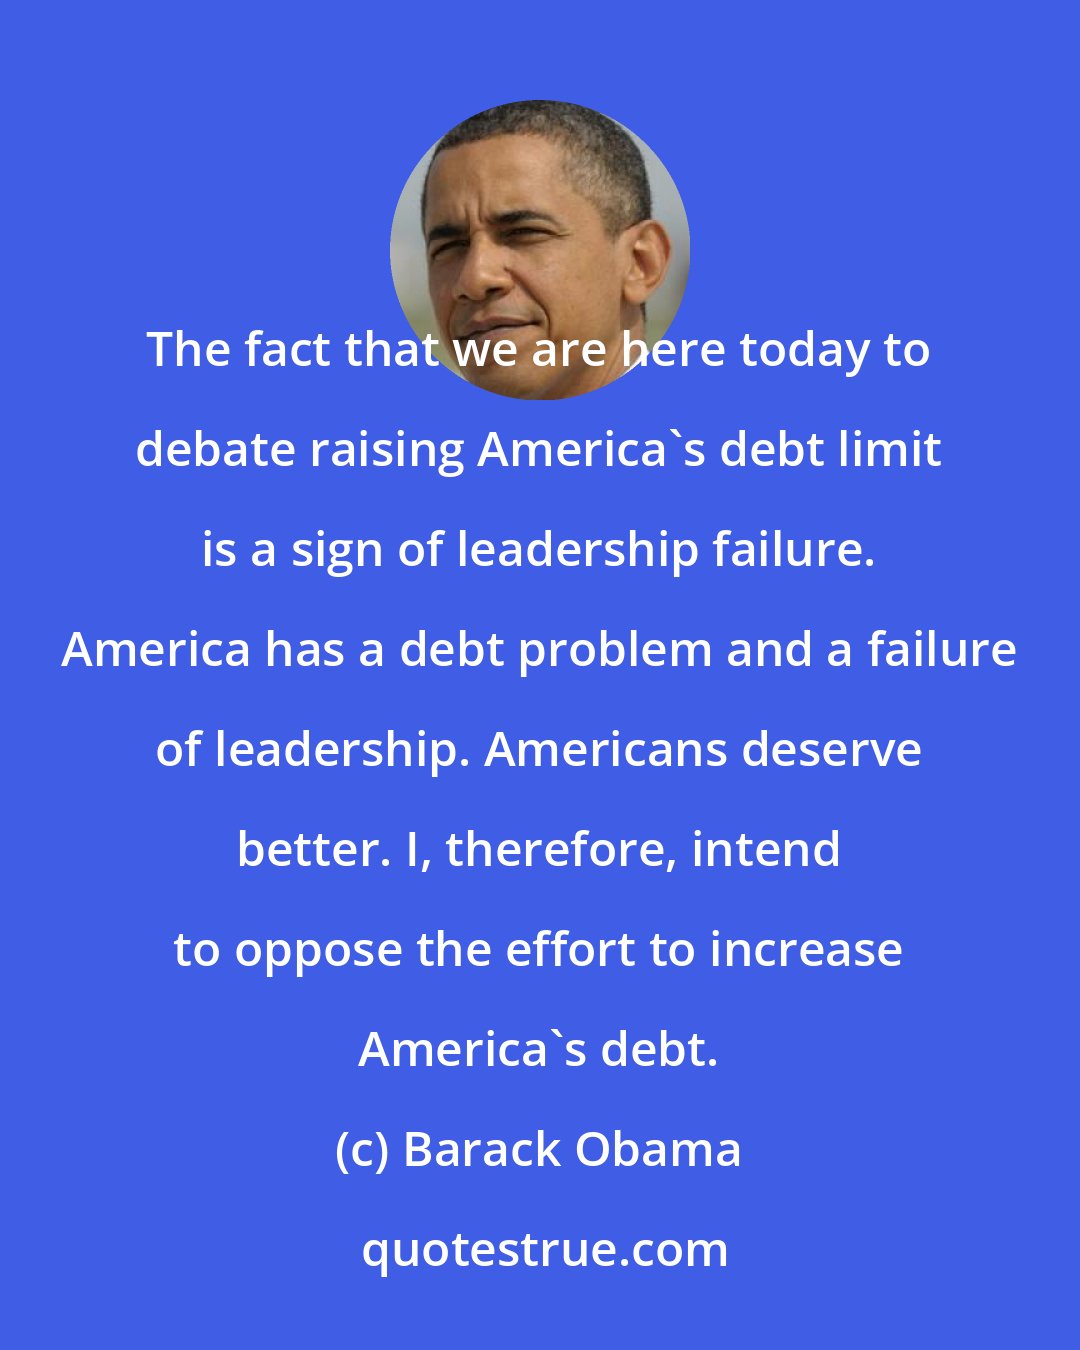 Barack Obama: The fact that we are here today to debate raising America's debt limit is a sign of leadership failure. America has a debt problem and a failure of leadership. Americans deserve better. I, therefore, intend to oppose the effort to increase America's debt.